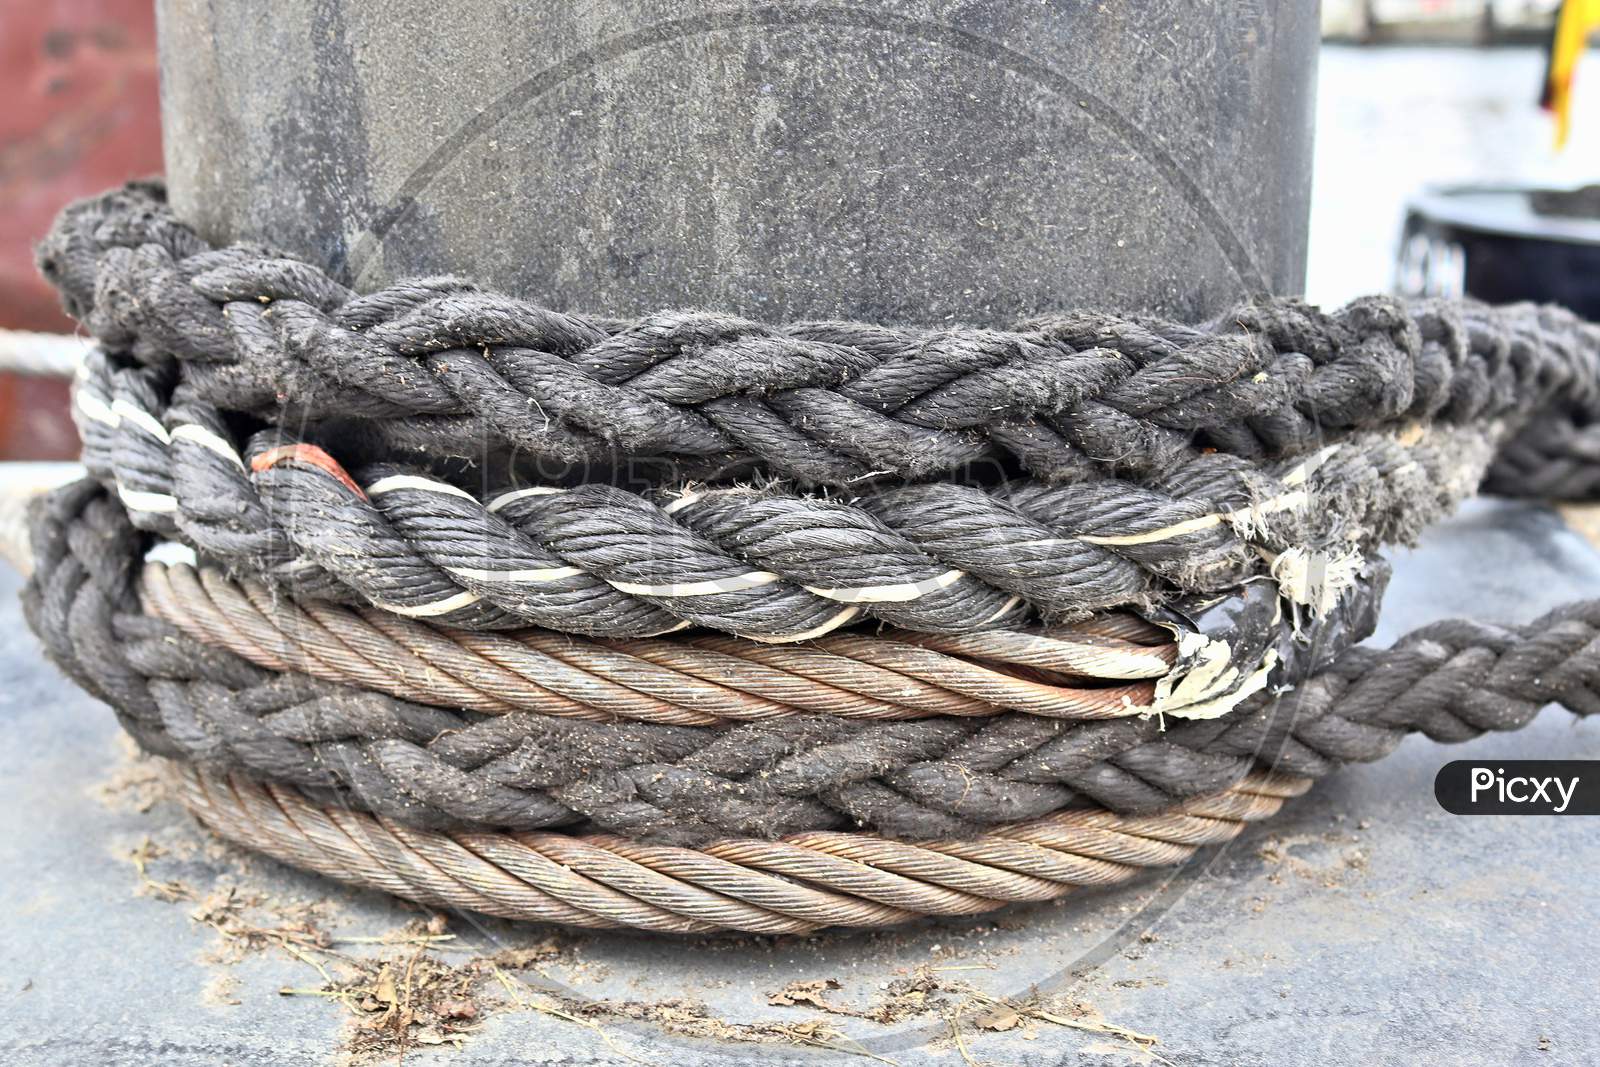 Detailed close up detail of ropes and cordage in the rigging of an old wooden vintage sailboat